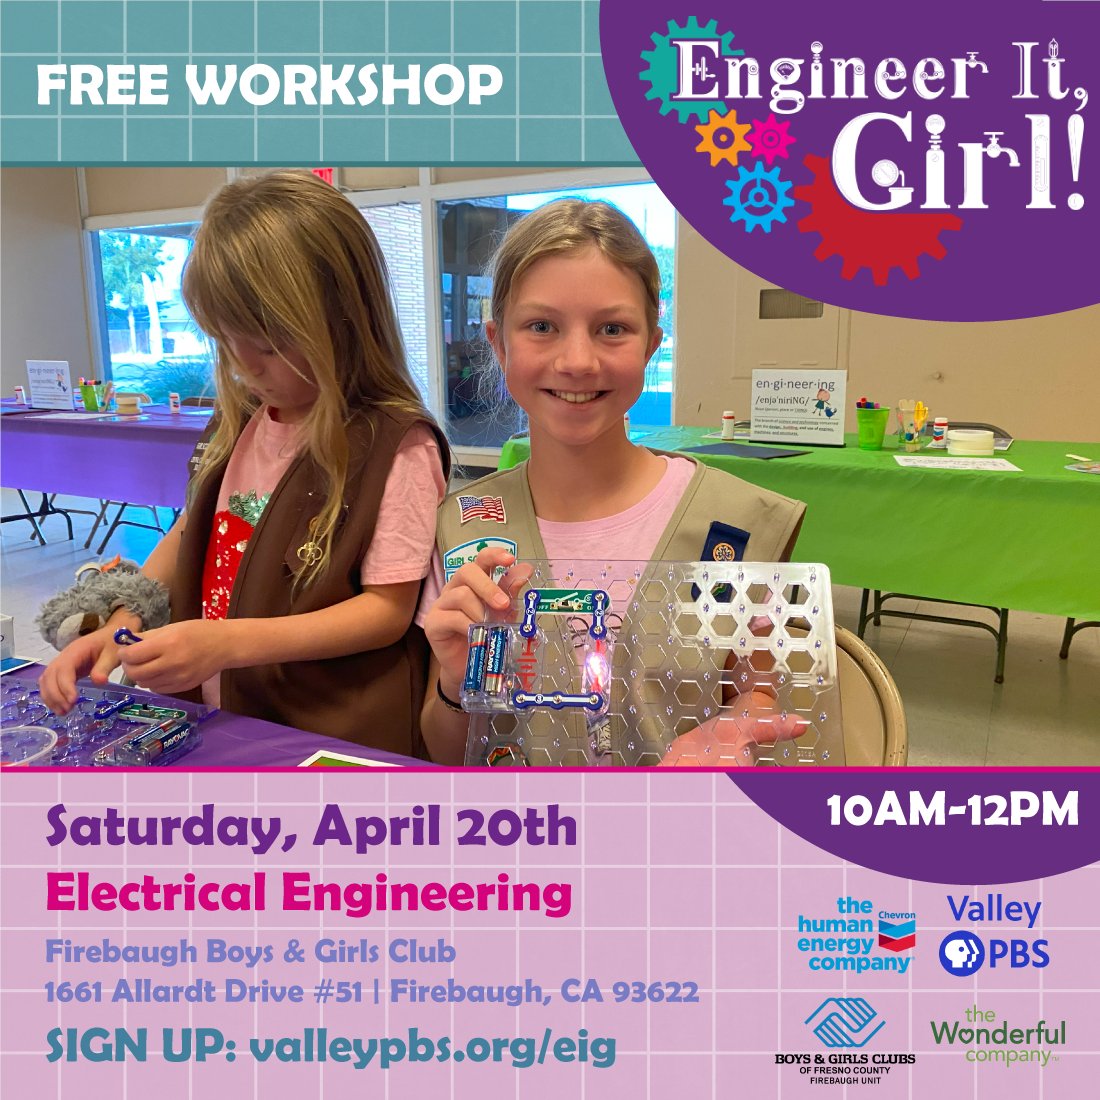 Don't forget that Valley PBS and Chevron will be traveling to Firebaugh for Electrical Engineering on Saturday, April 20th. Sign up now and let’s Engineer It, Girl! Sign up: valleypbs.org/eig